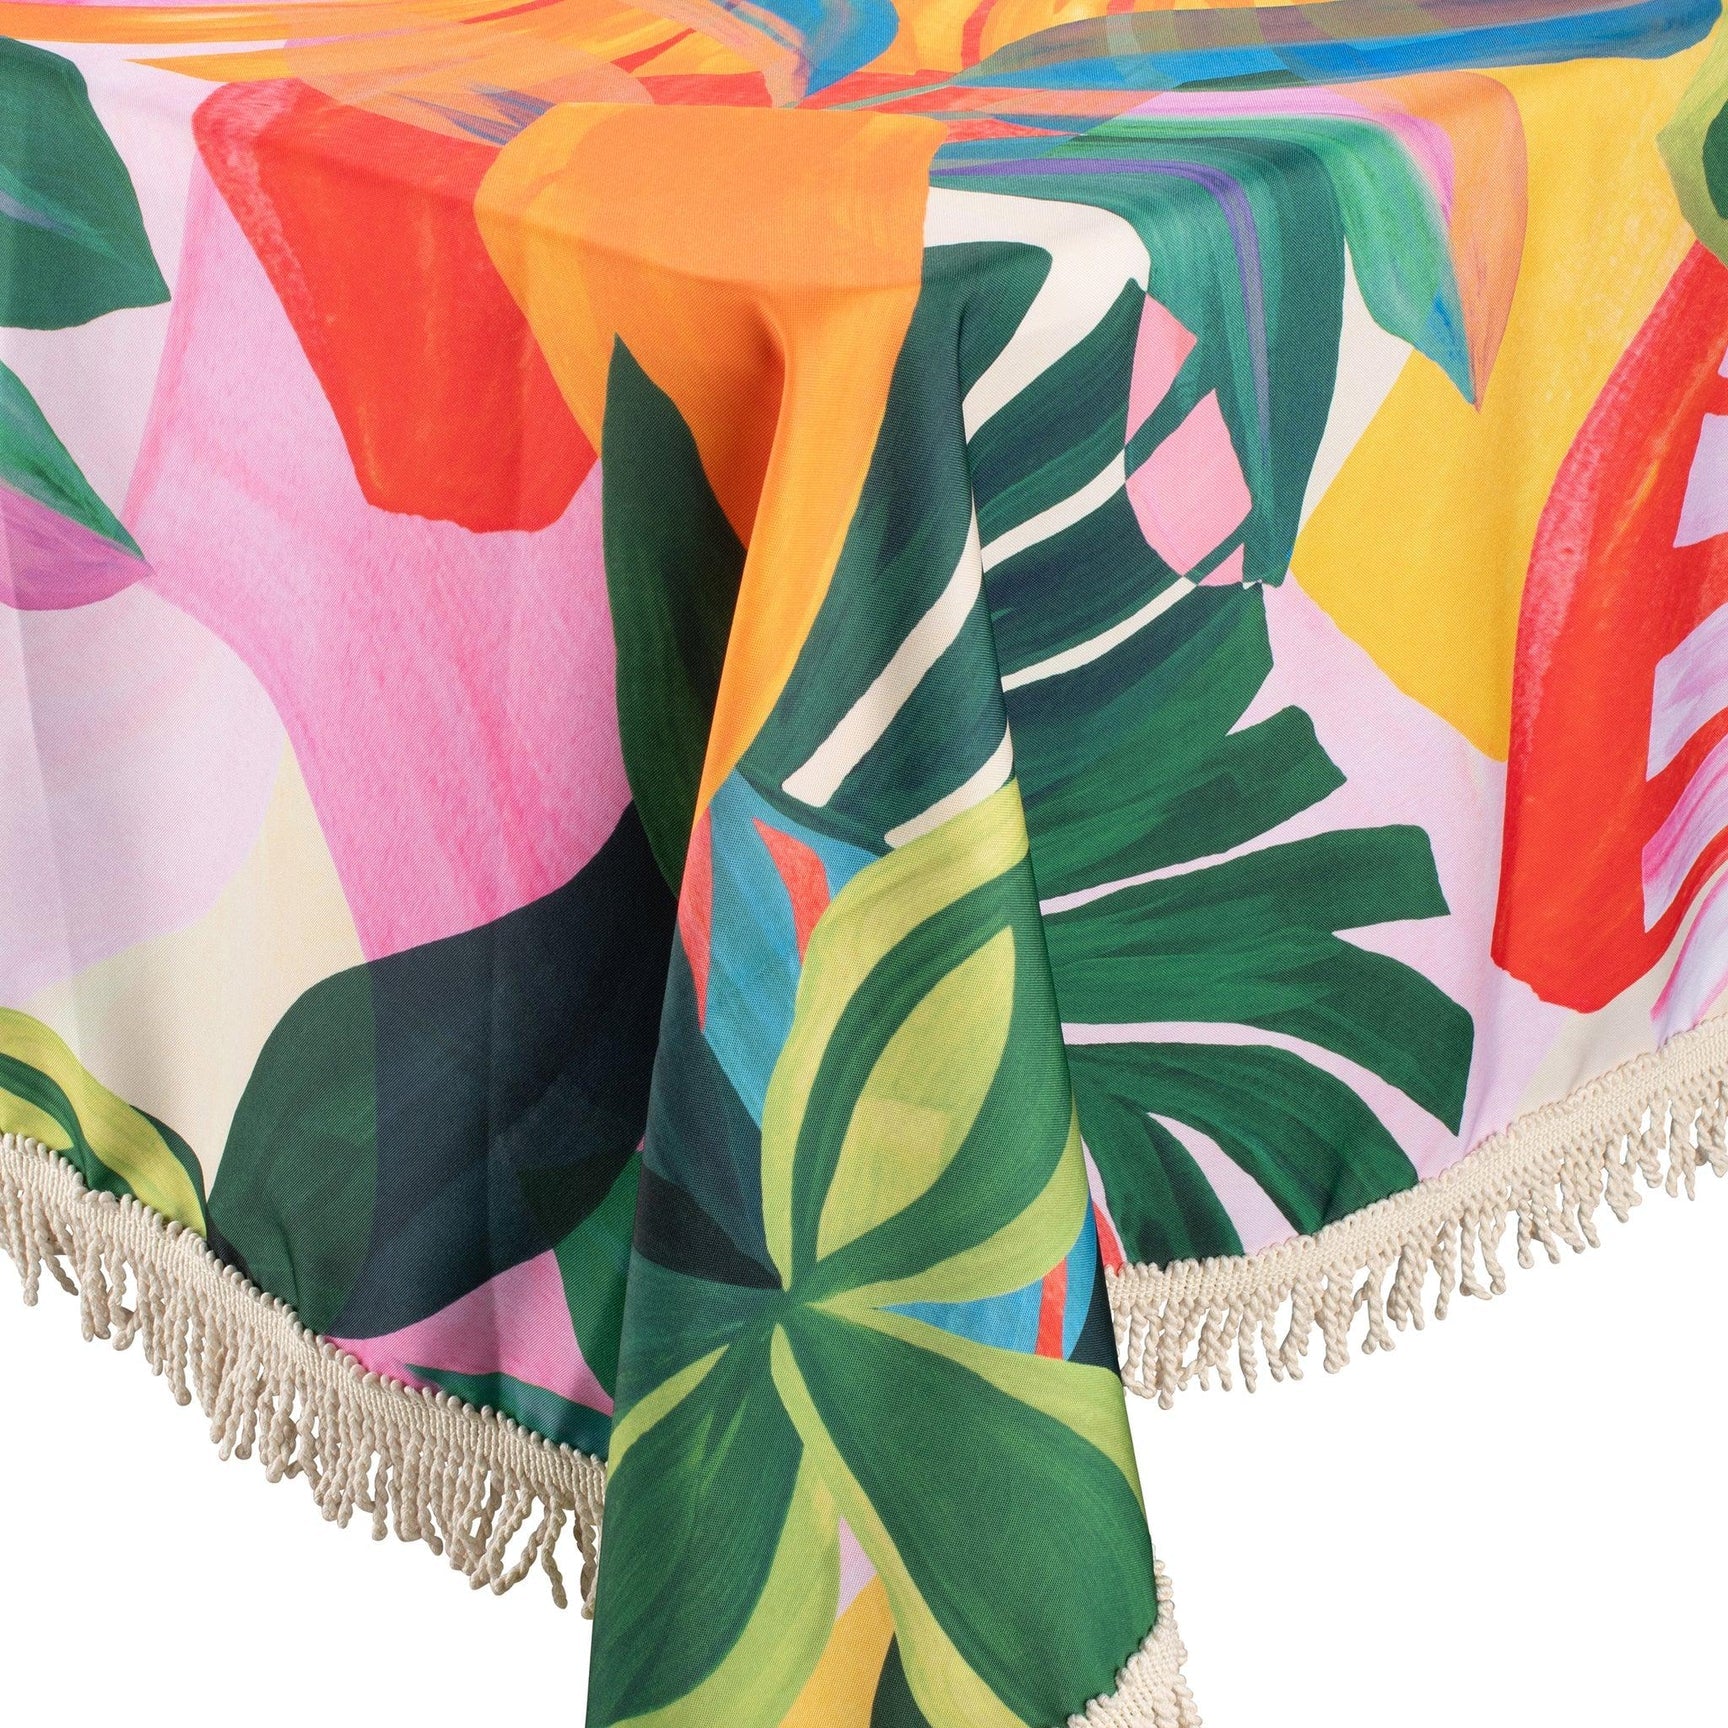 Fringed Tablecloth - Summertime | Kollab